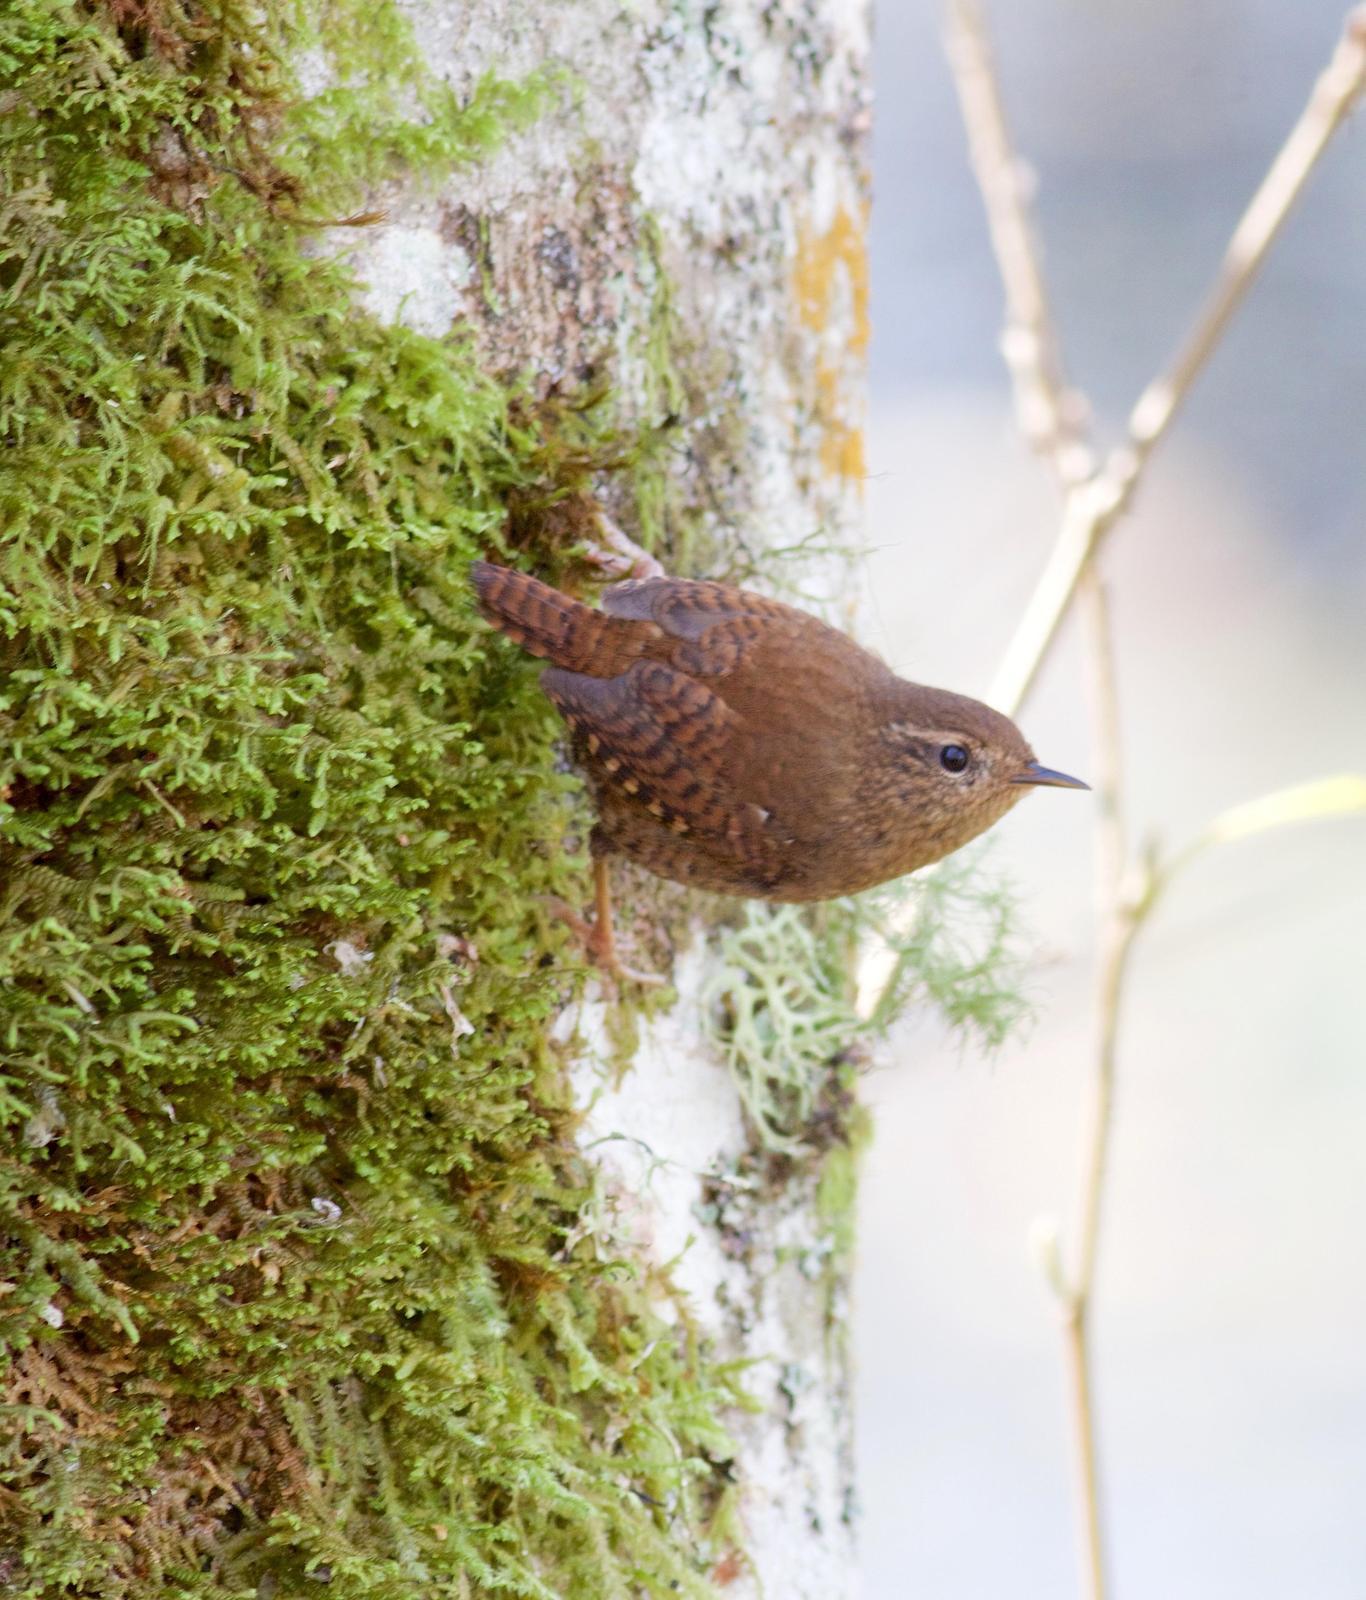 Pacific Wren Photo by Kathryn Keith